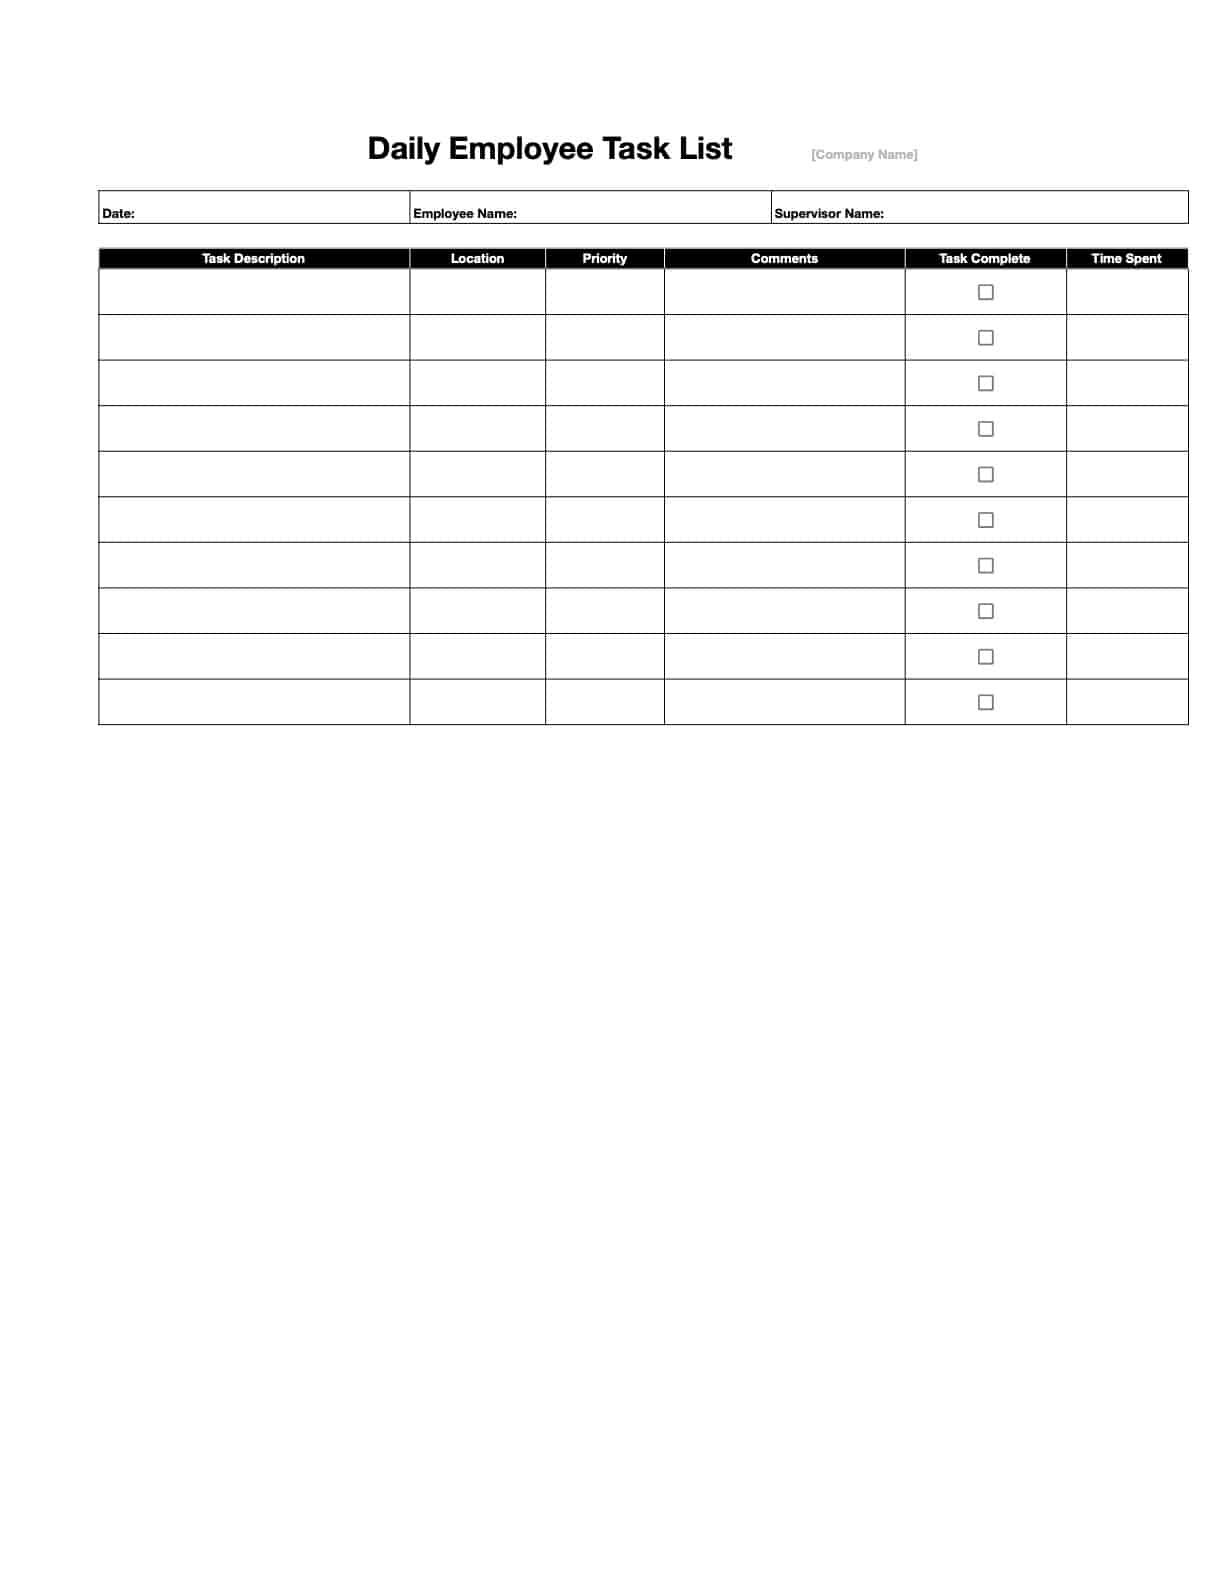 Daily Employee Task List Template